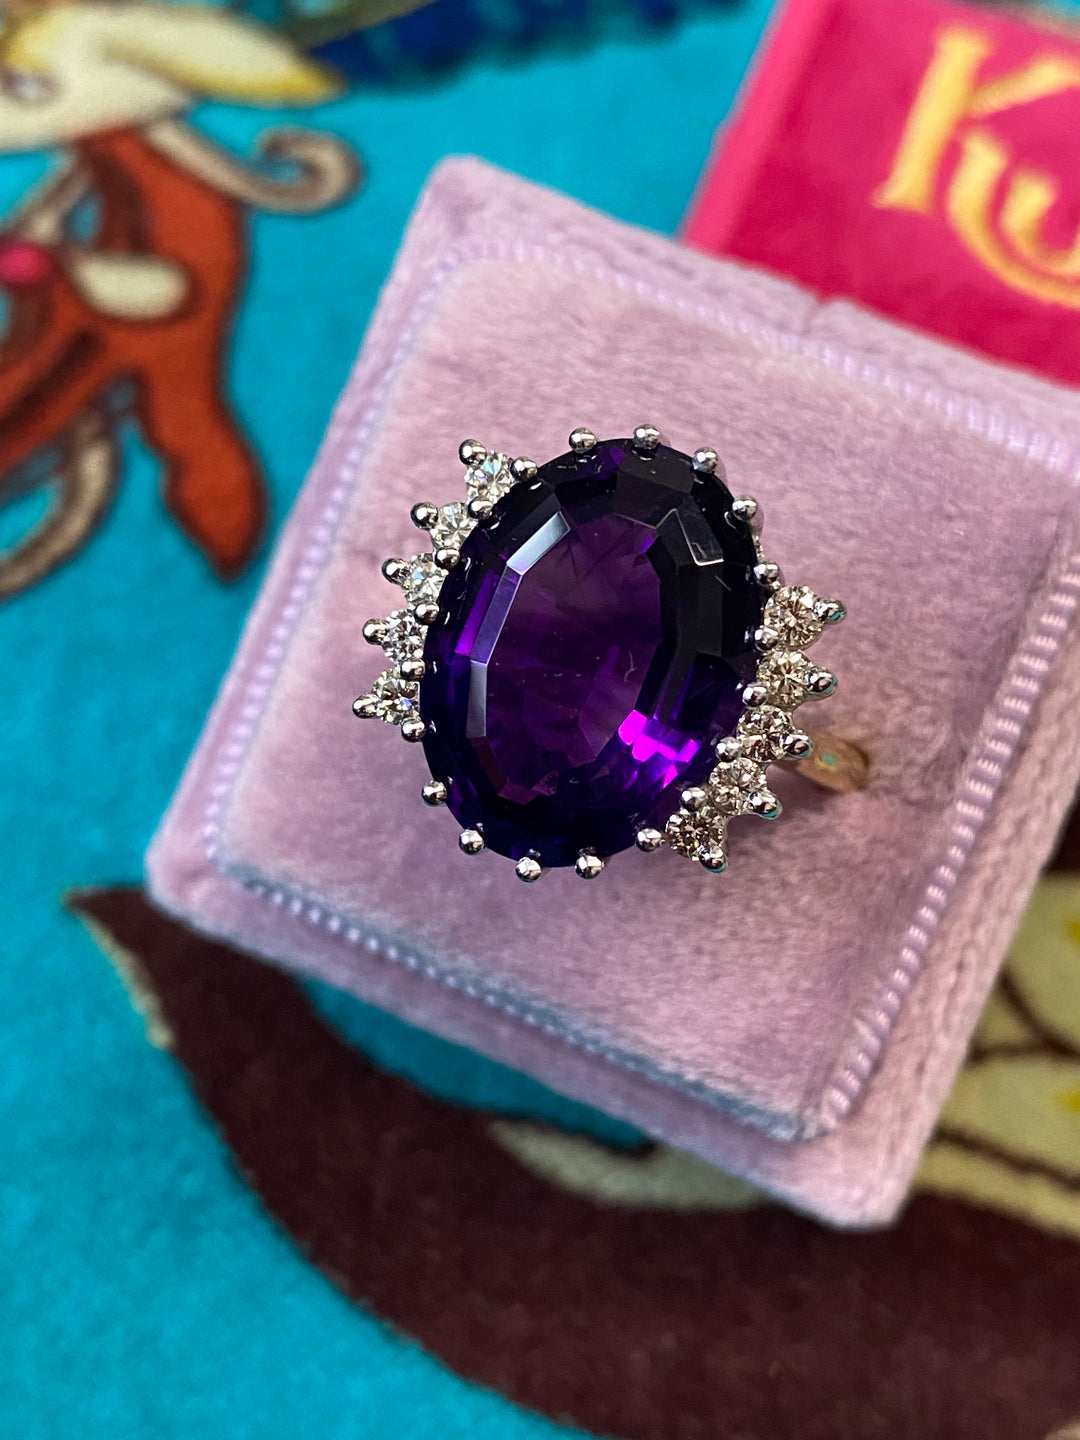 Vintage 10.00 Carat Amethyst and Diamond Ring in 18ct White and Yellow Gold